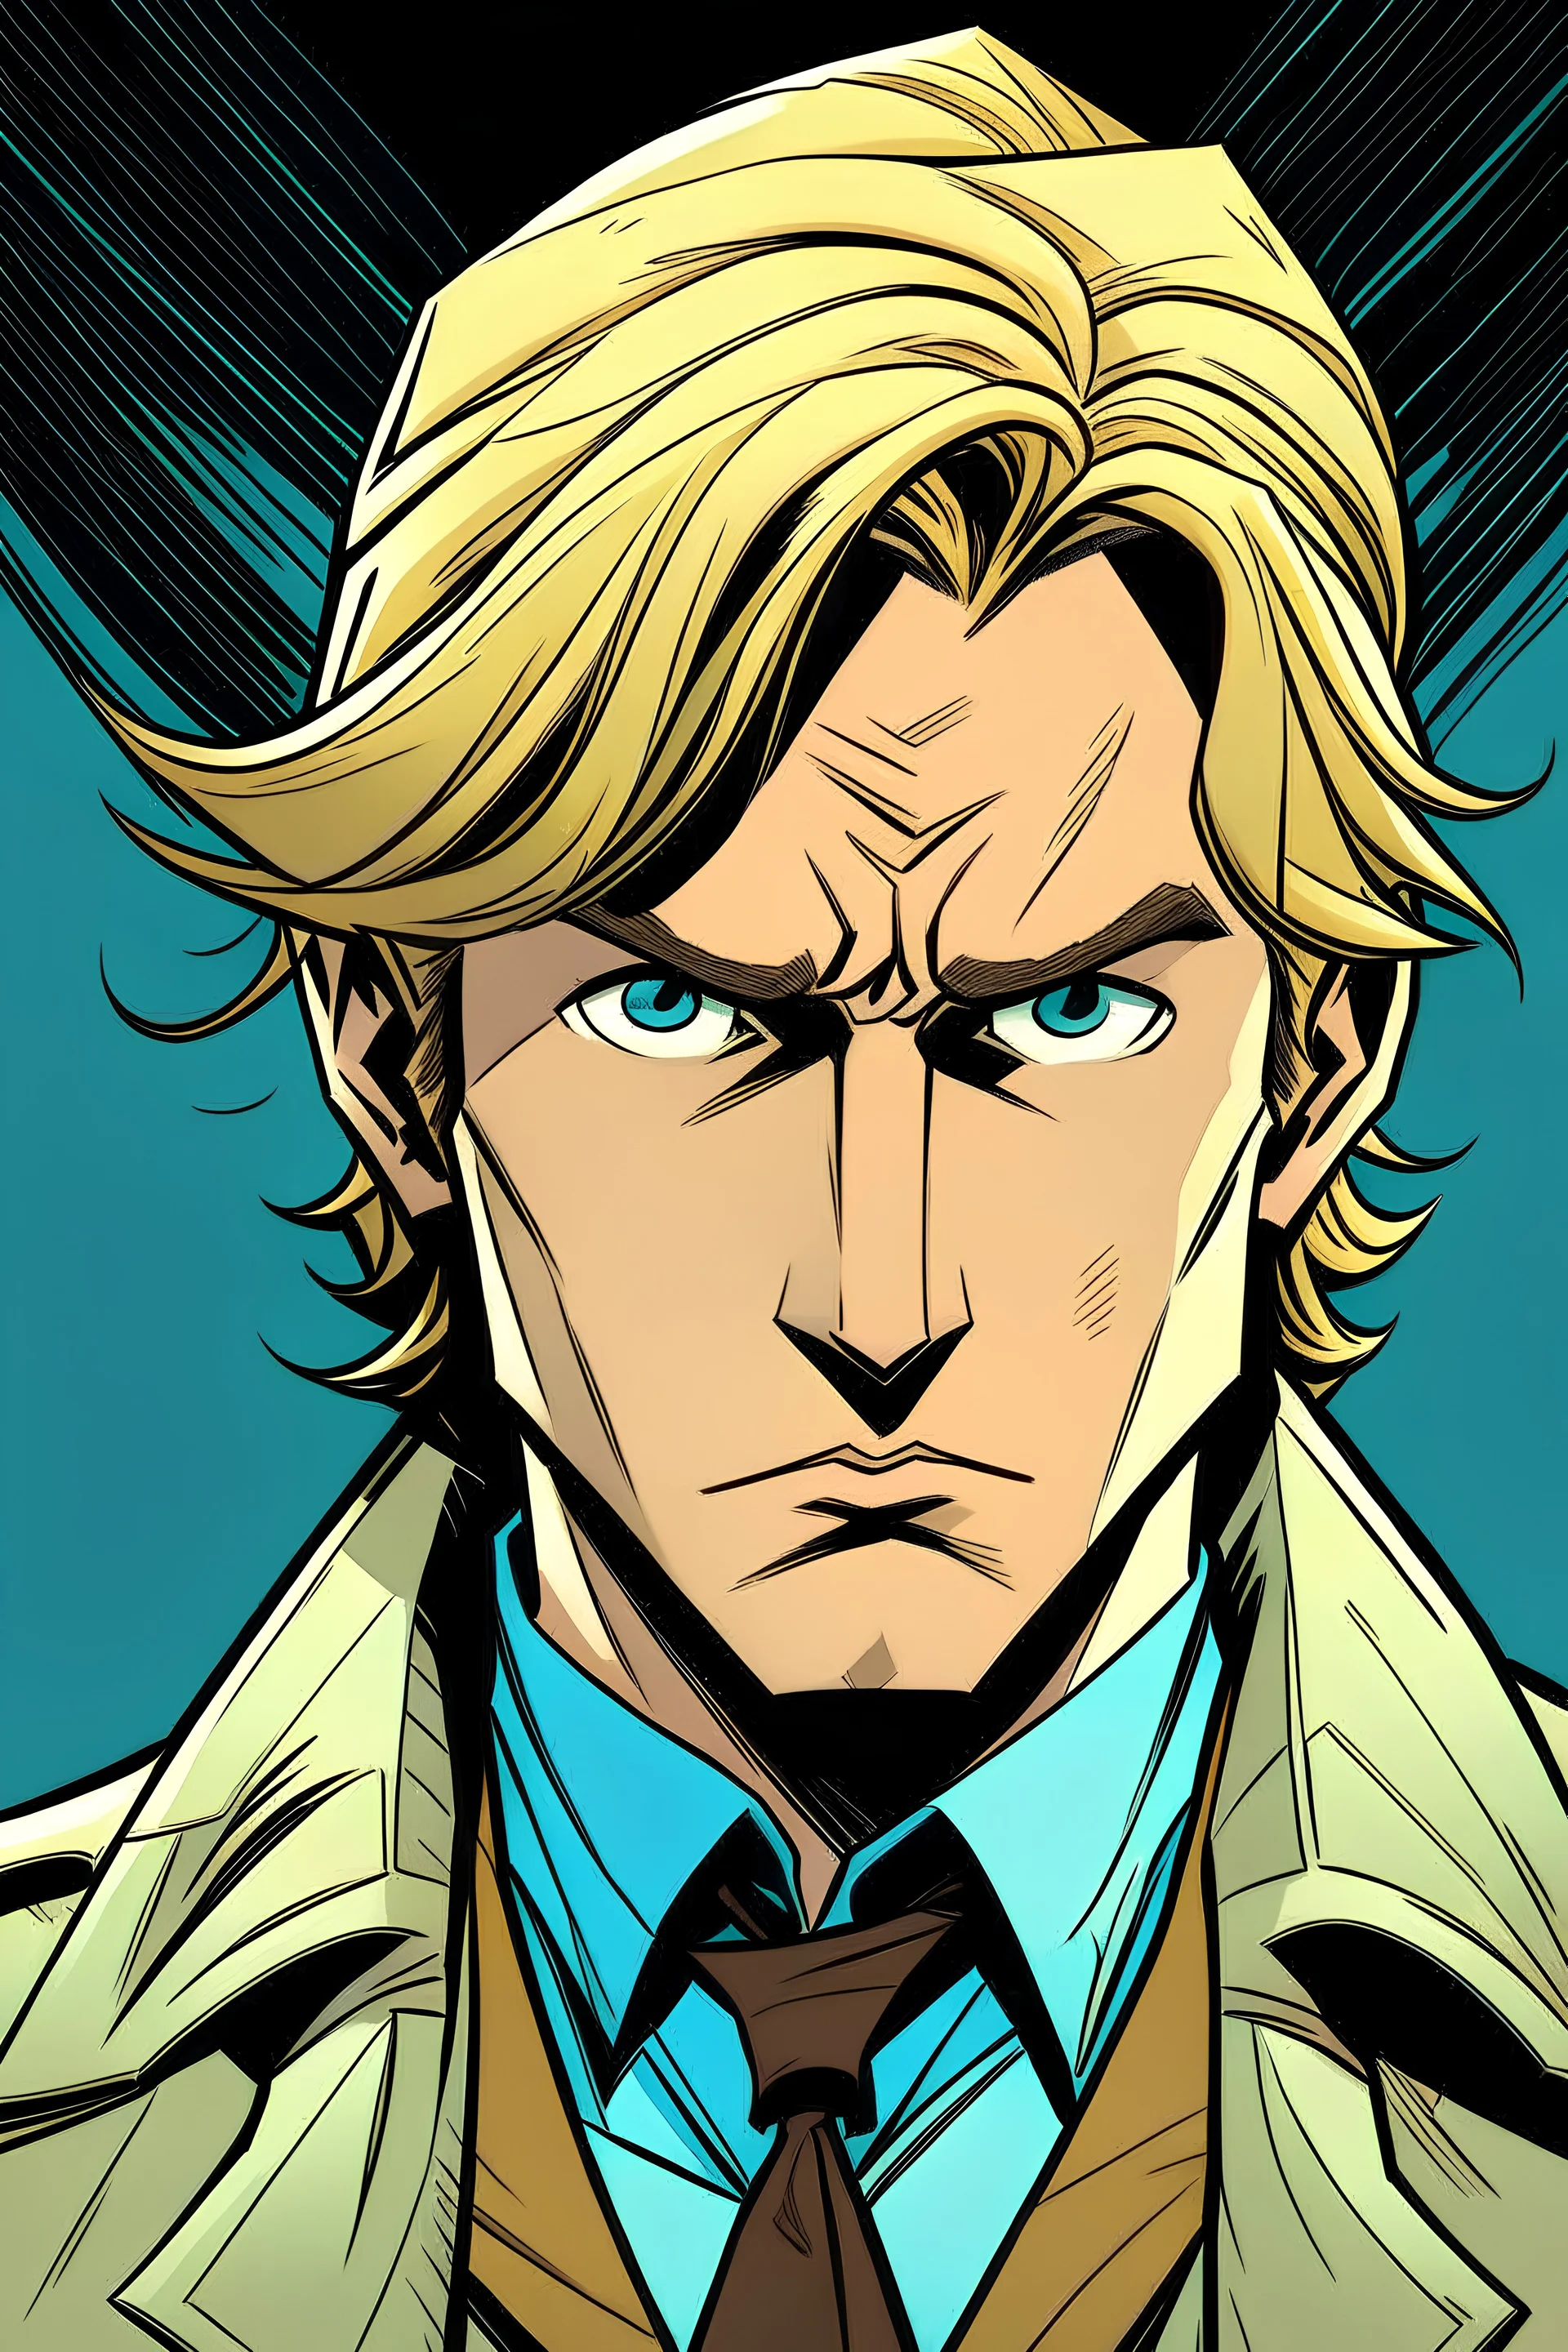 Detective, looking serious, with blond hair in a comic style